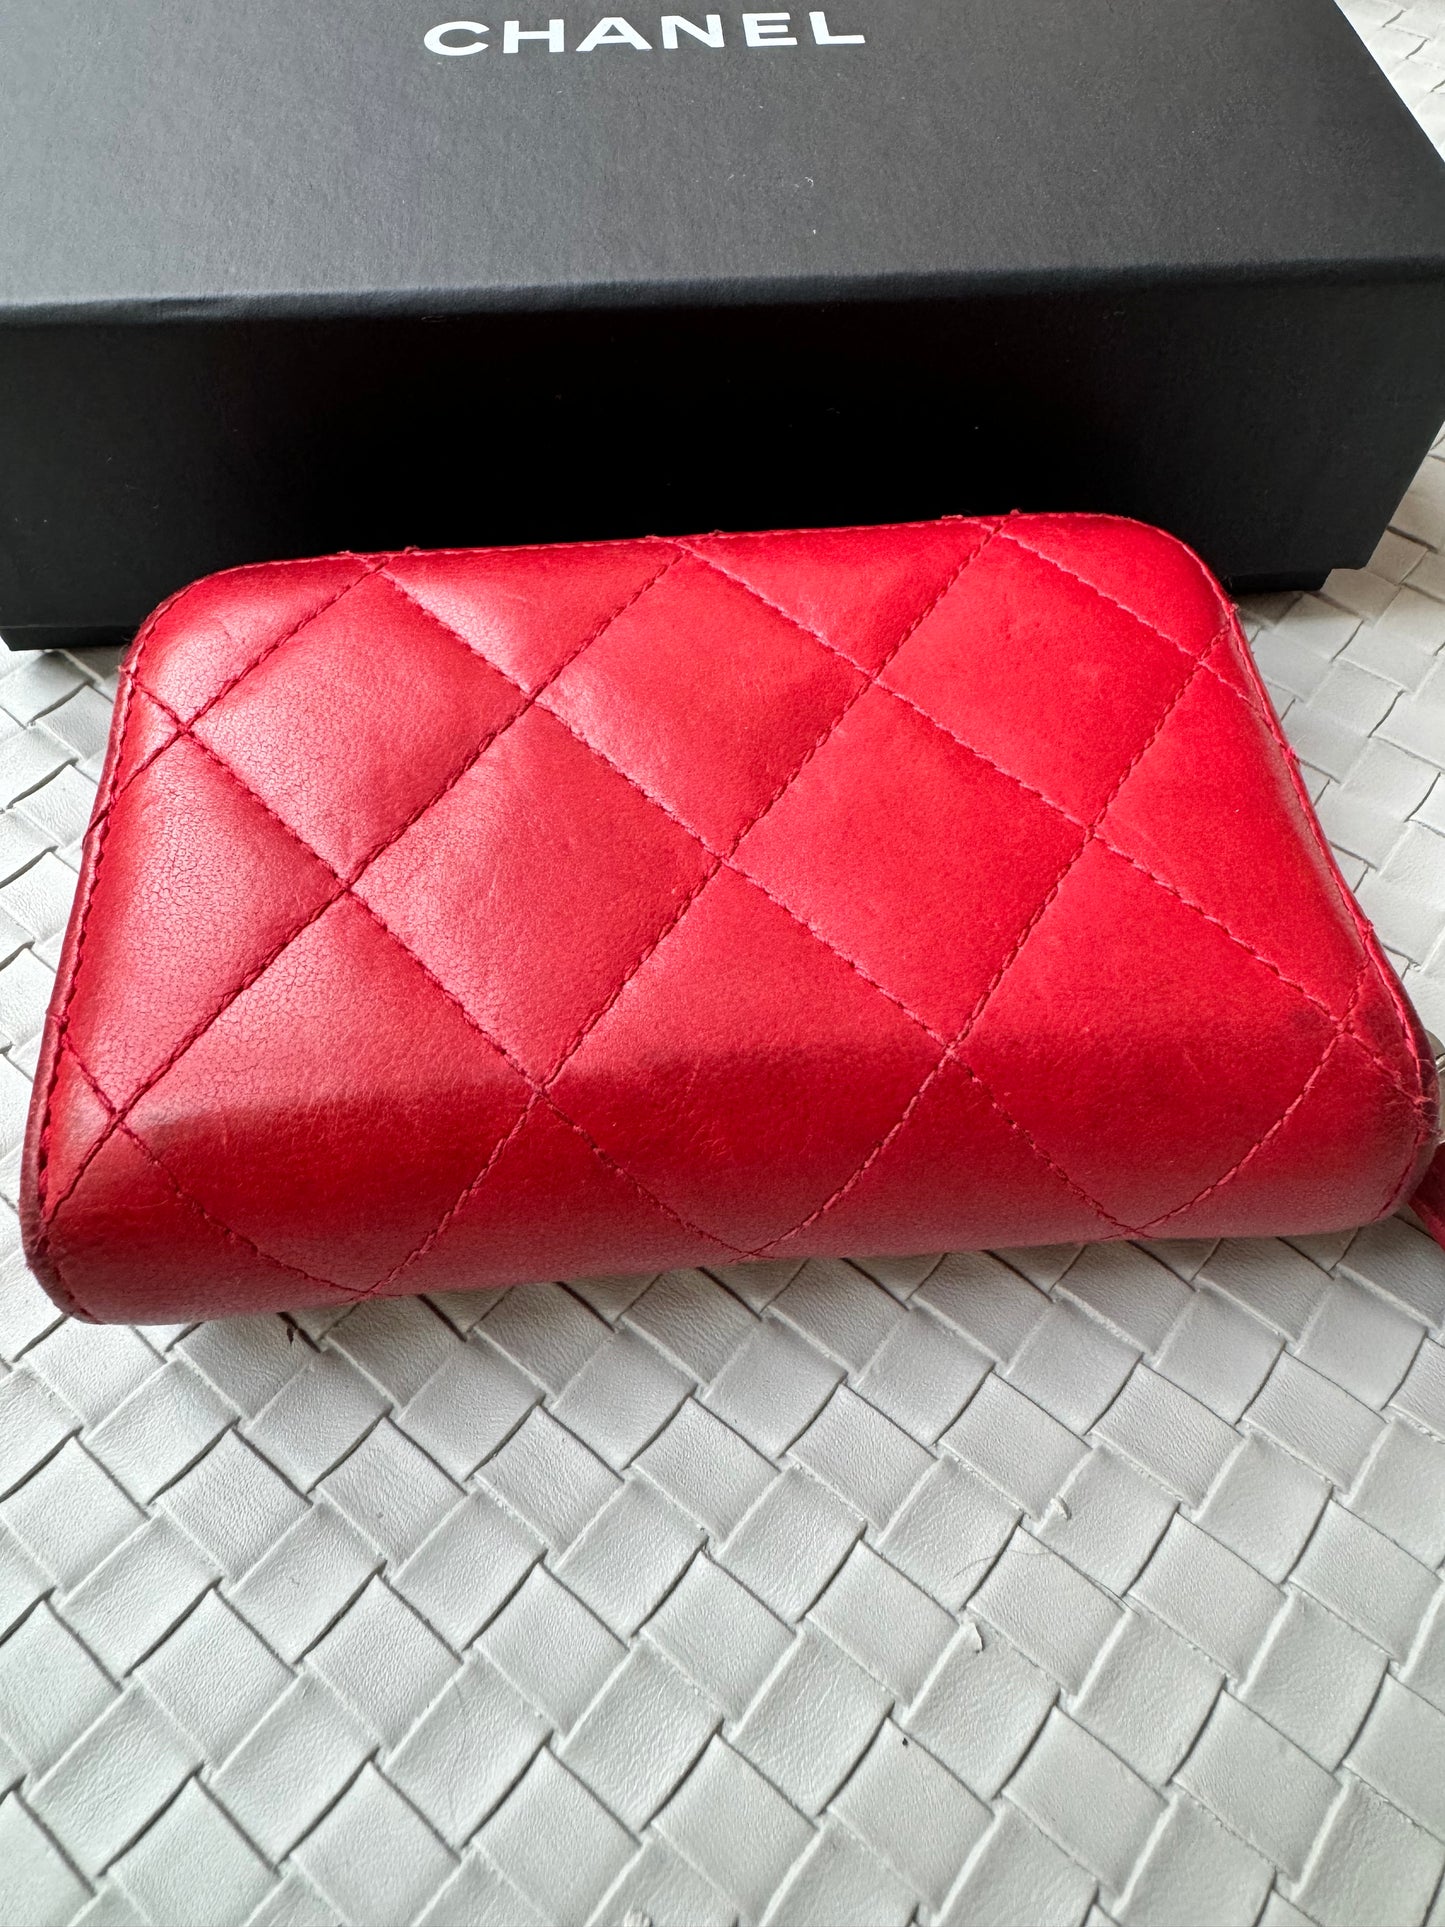 Chanel CC Lambskin Coin Holder Mini Wallet Card Case Matelasse Red Zip Quilted Pre-Owned